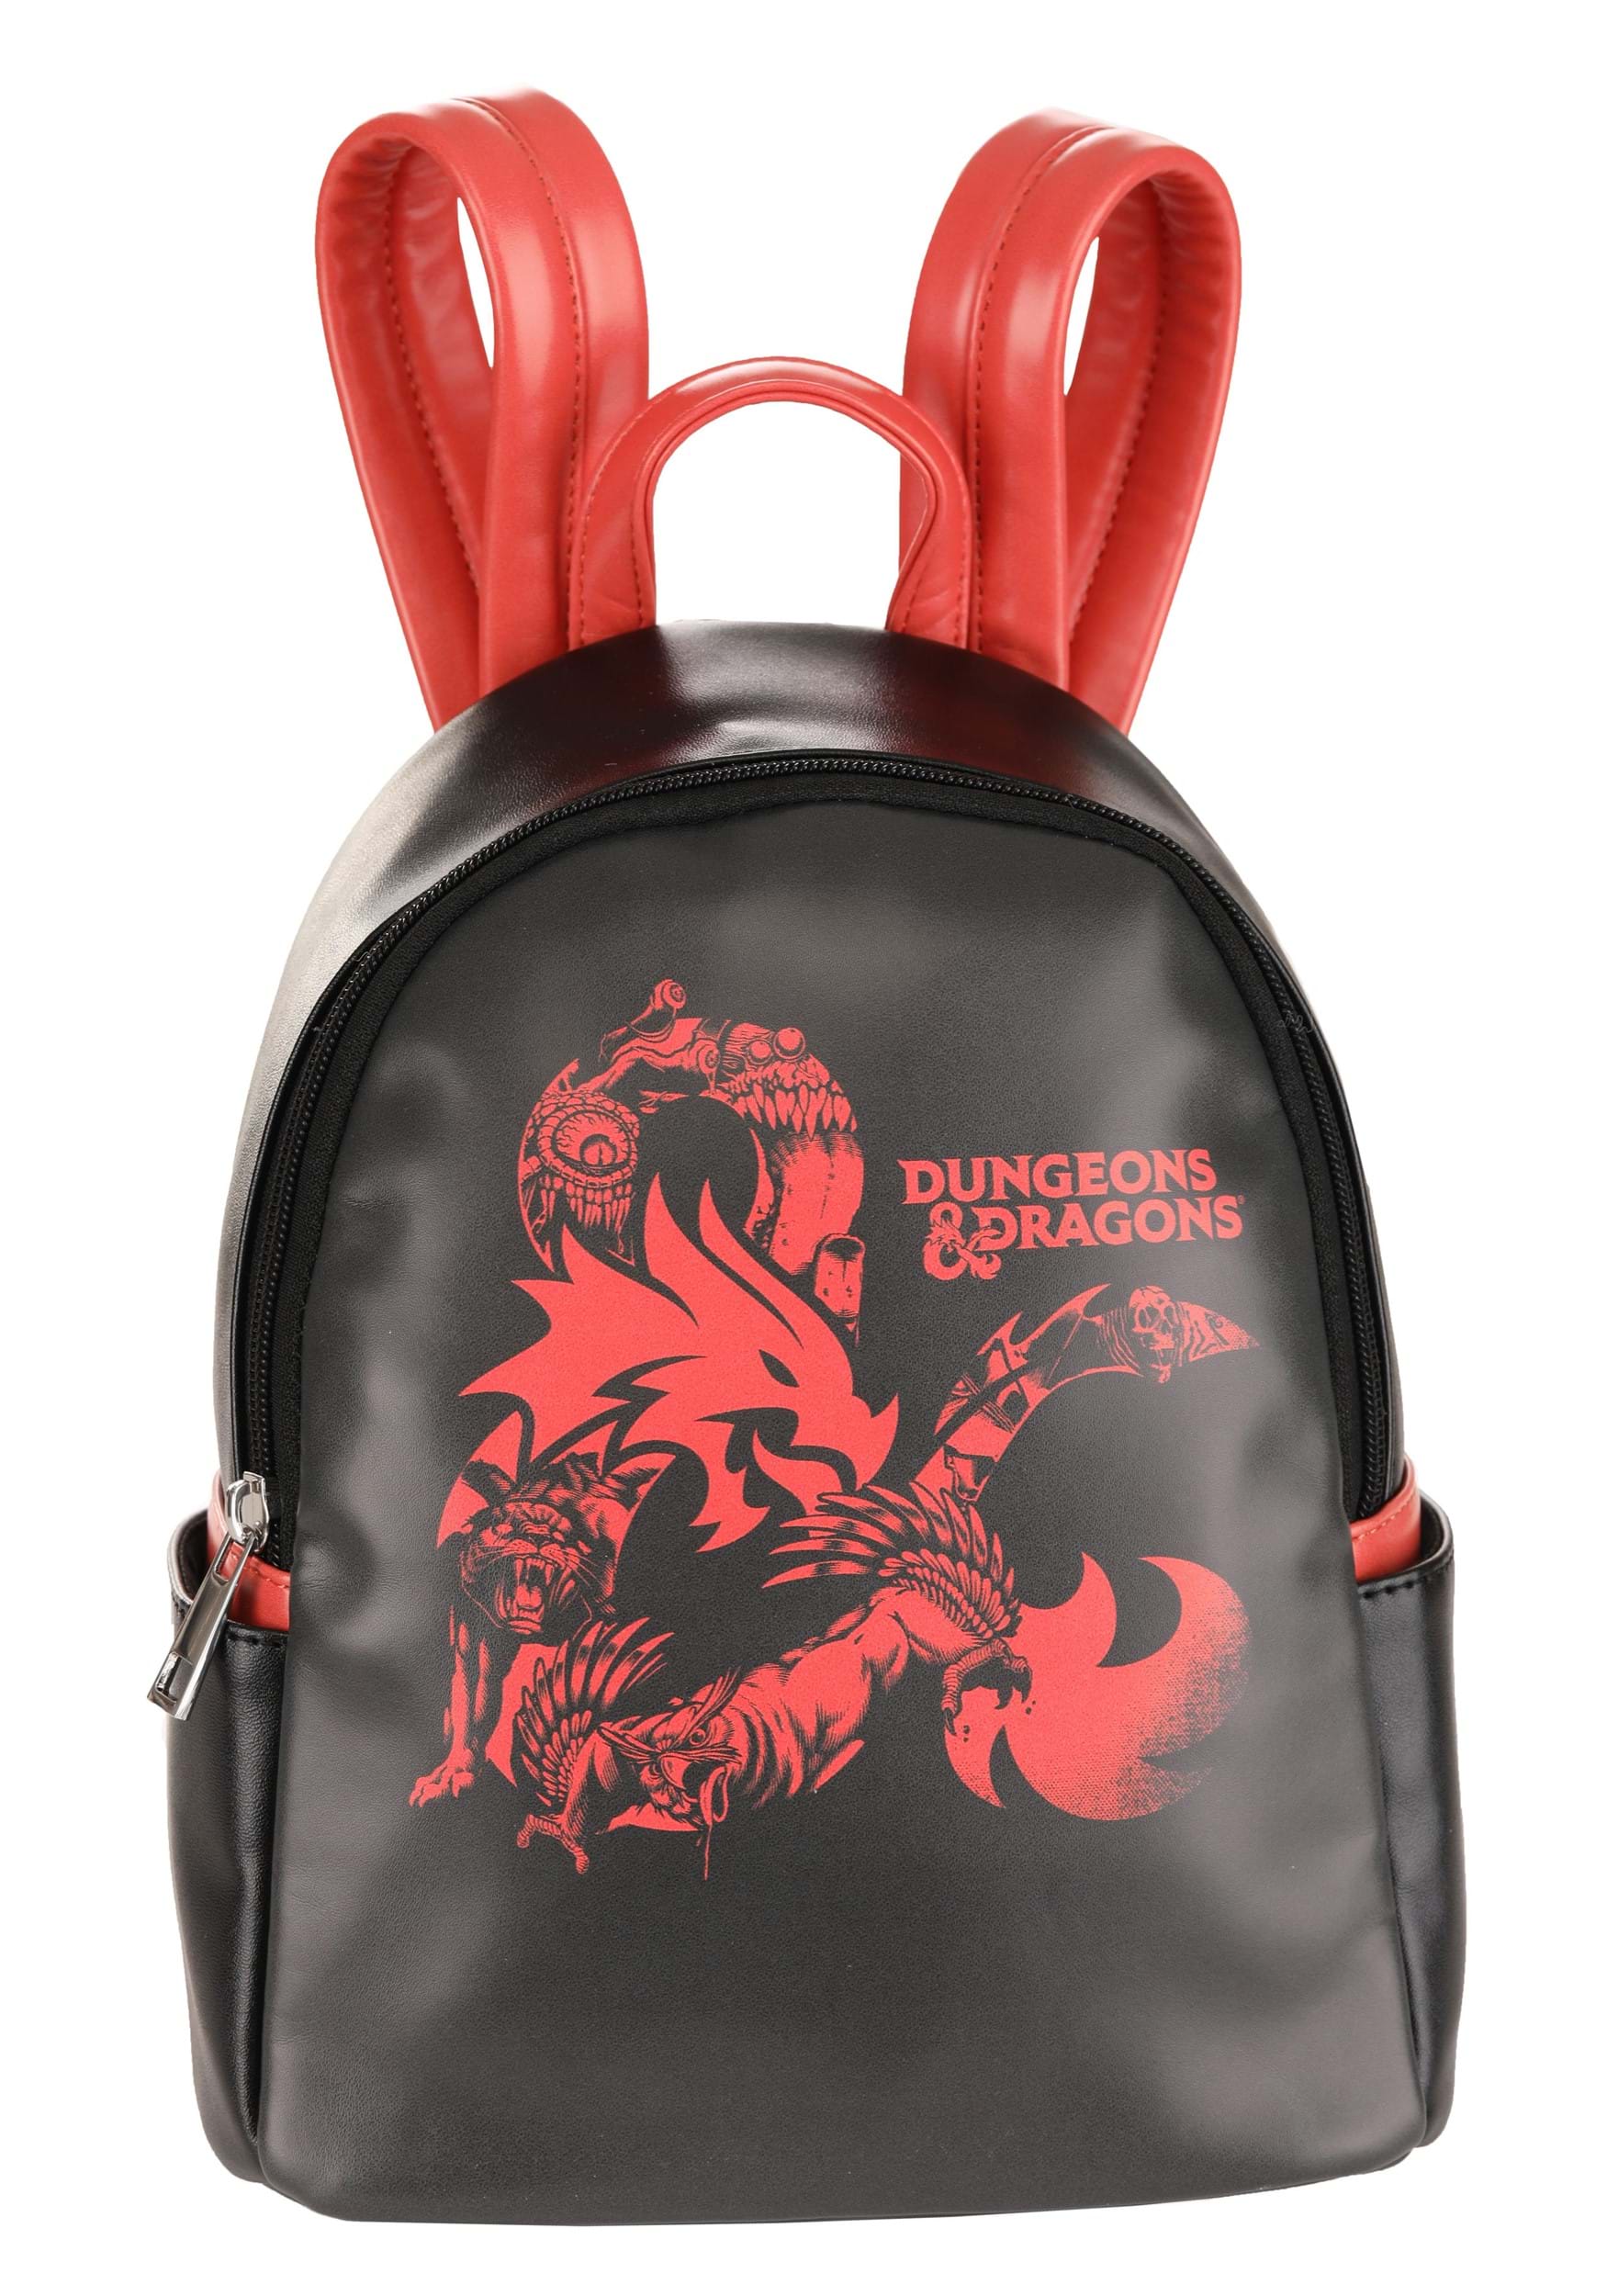 Dungeons and Dragons Mini Backpack